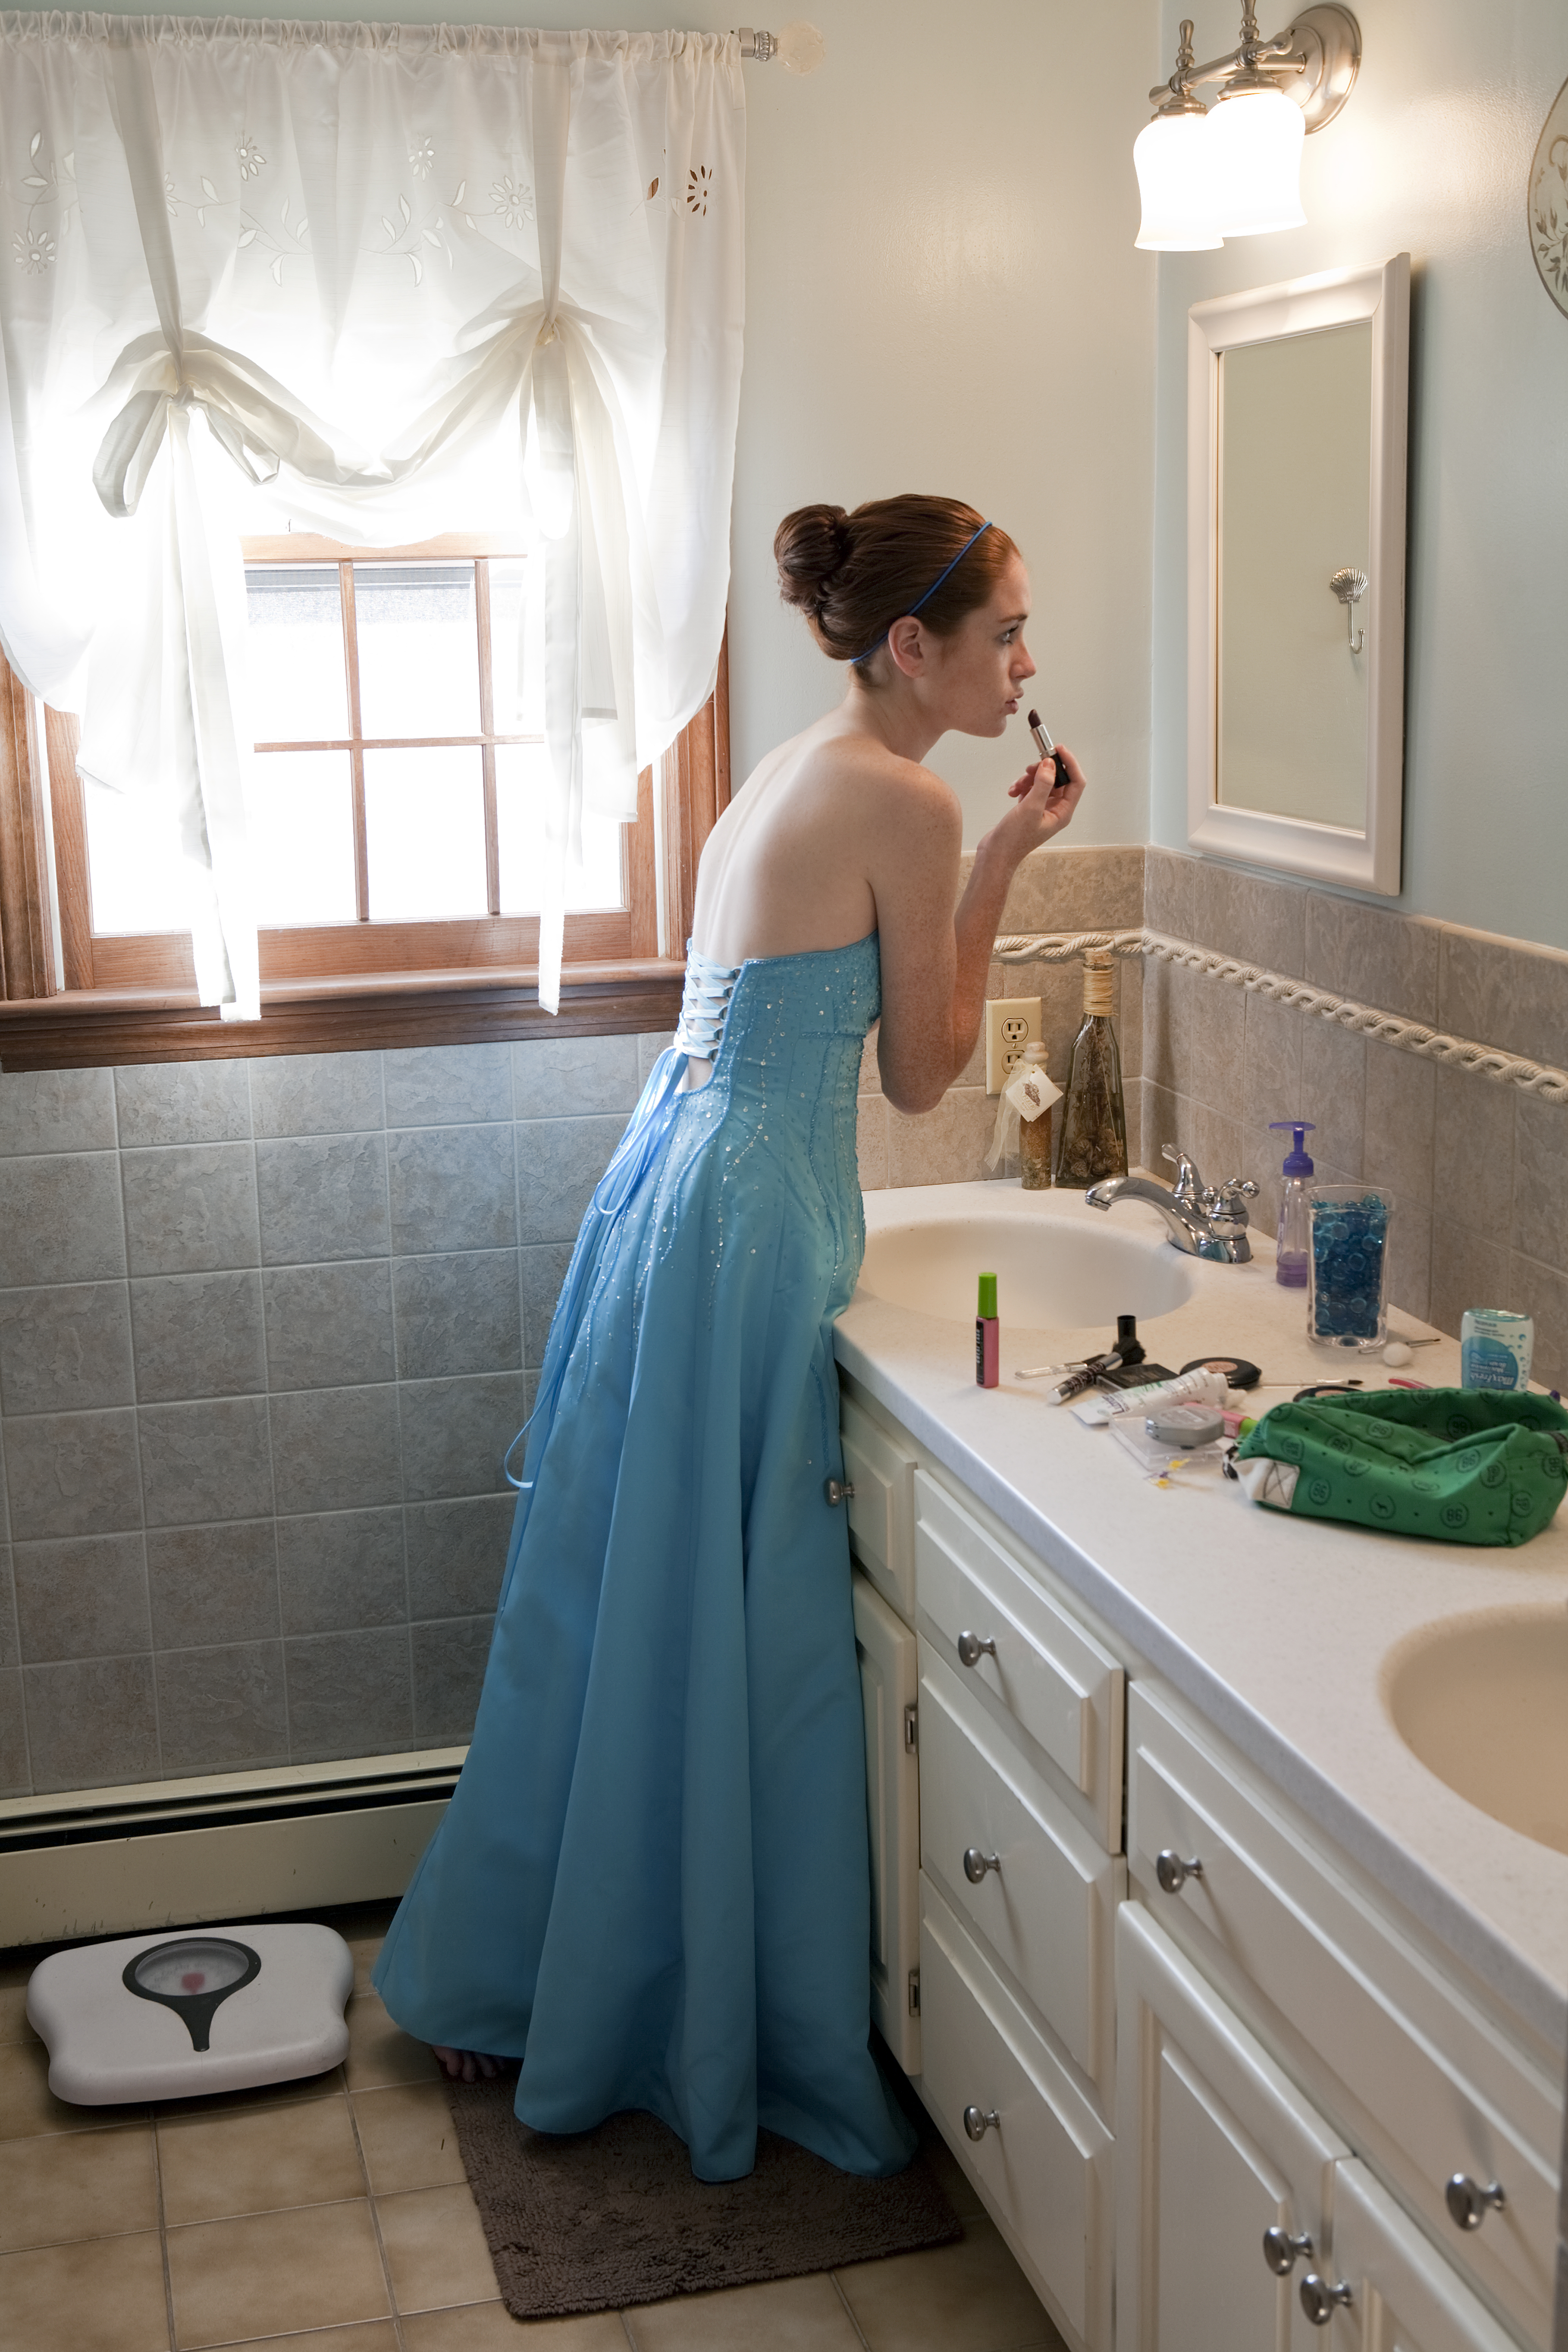 A girl getting ready for prom | Source: Getty Images